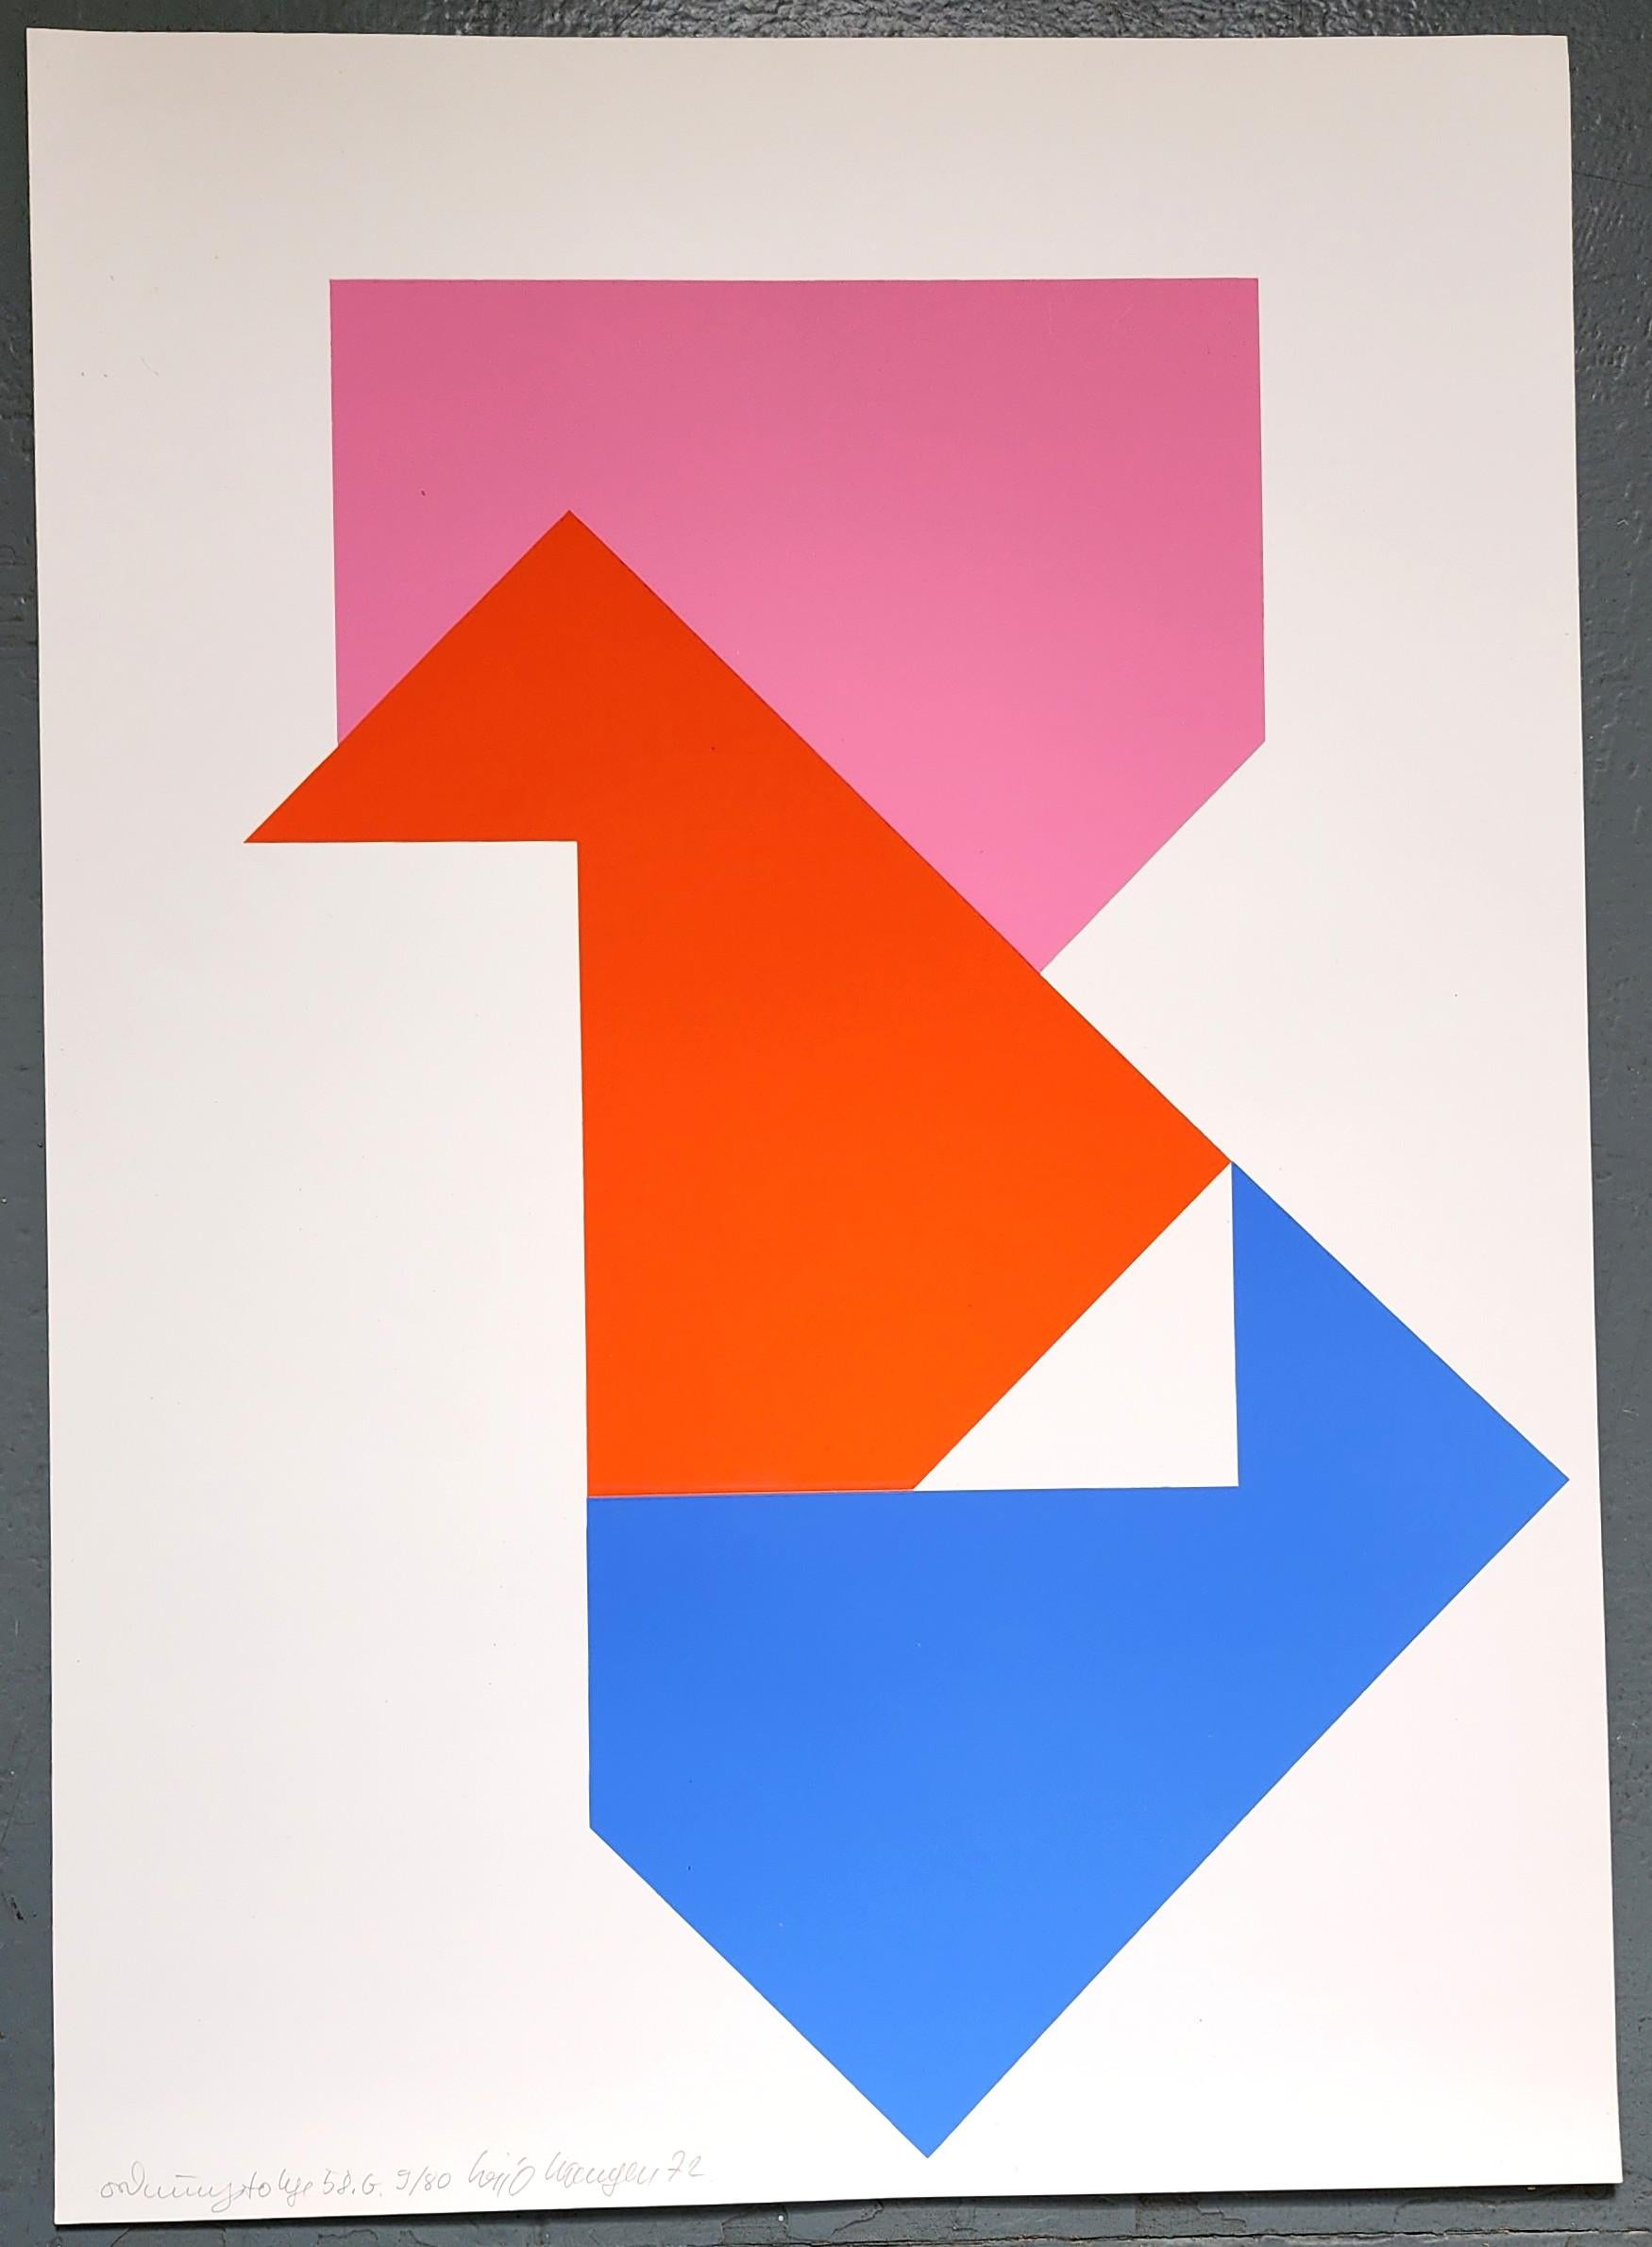 Hajo Hangen Abstract Print - Order #58.G (Ordnungsfolge 58.G) (~50% OFF LIST PRICE - VERY LIMITED TIME ONLY)